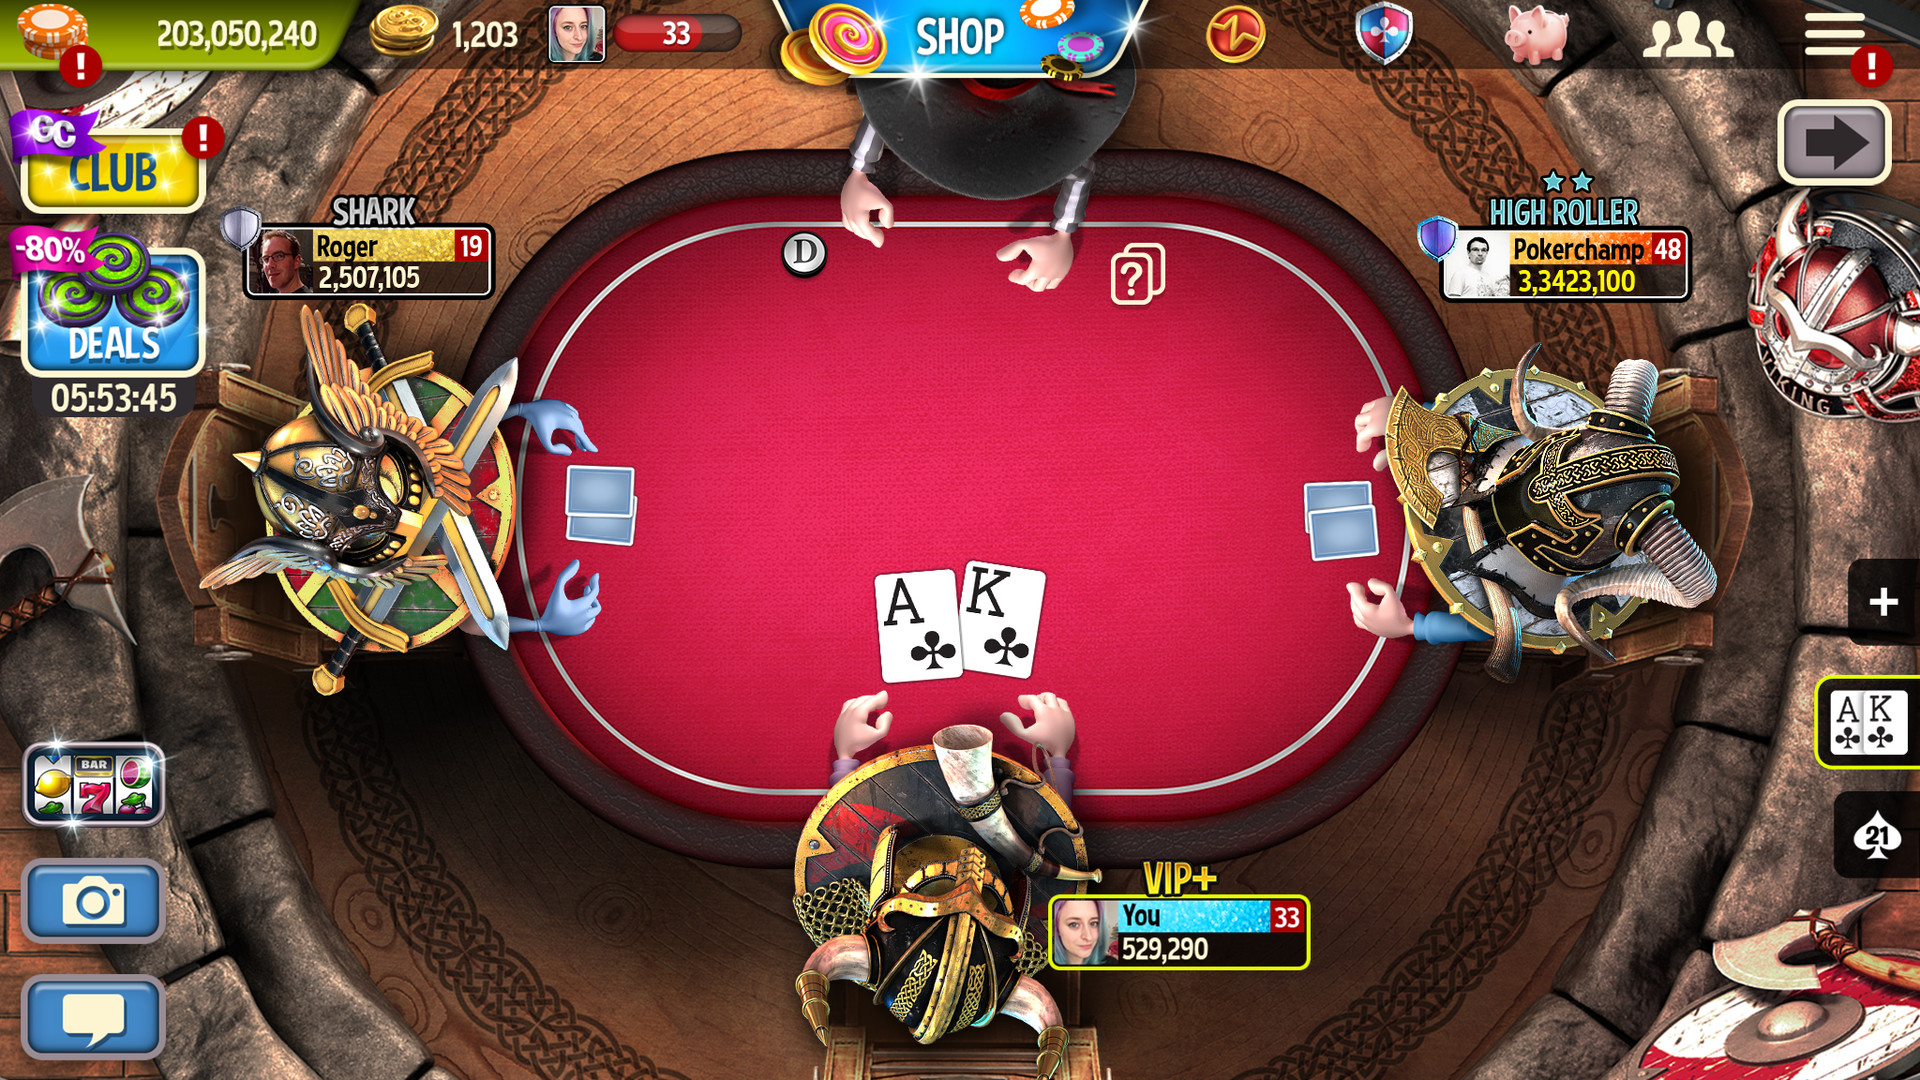 Governor of Poker 3 on Steam